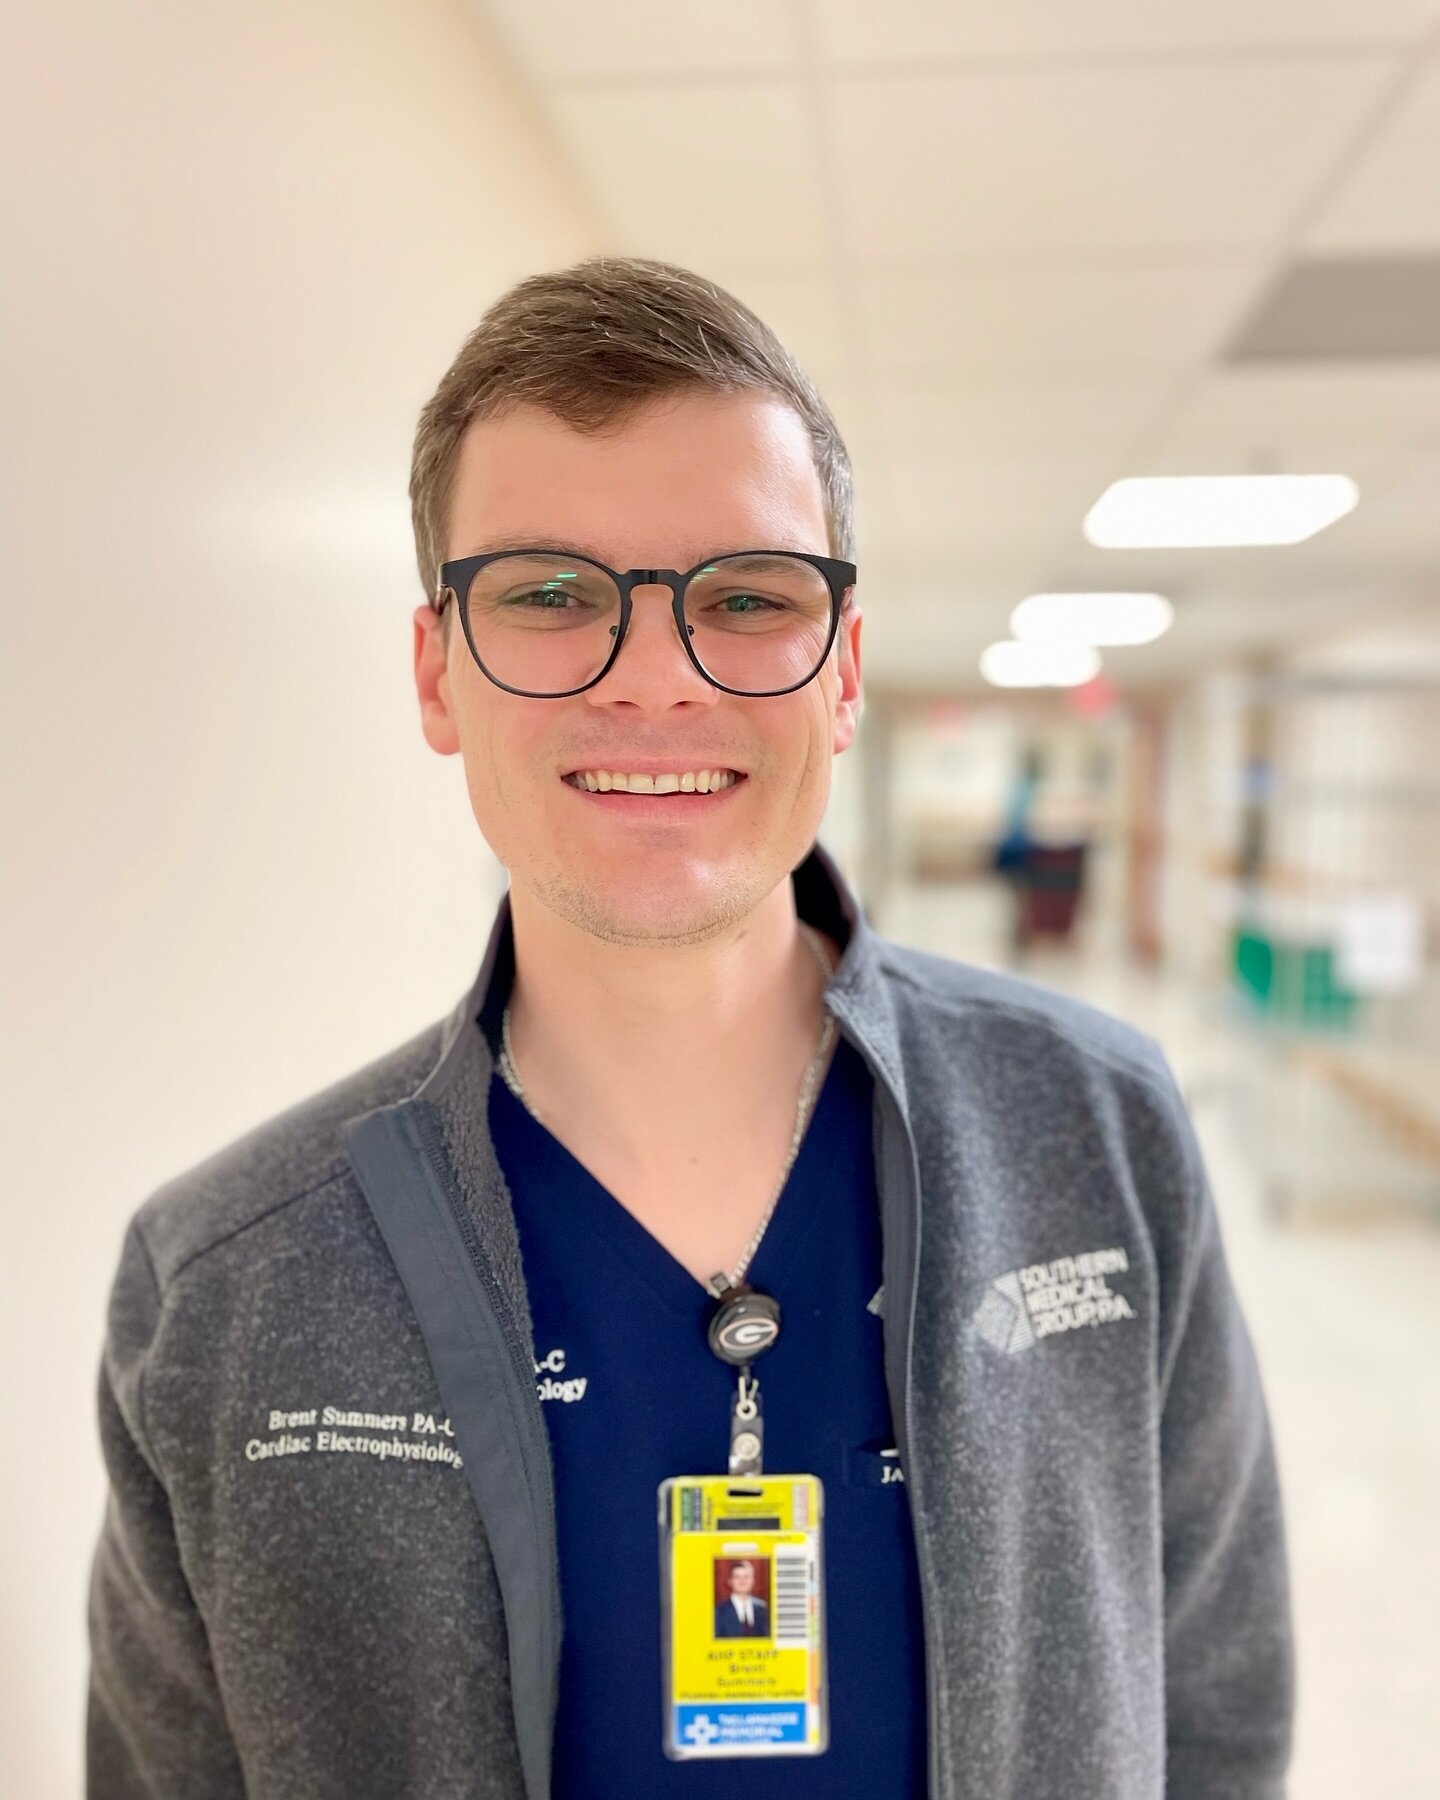 👋 Meet Brent Summers, PA-C! Brent is our newest physician assistant working for Dr. Bavikati at the Heart Rhythm Clinic. Brent is a Florida State Seminole and graduated from FSU&rsquo;s physician assistant program.
 
Brent is passionate about lifelo